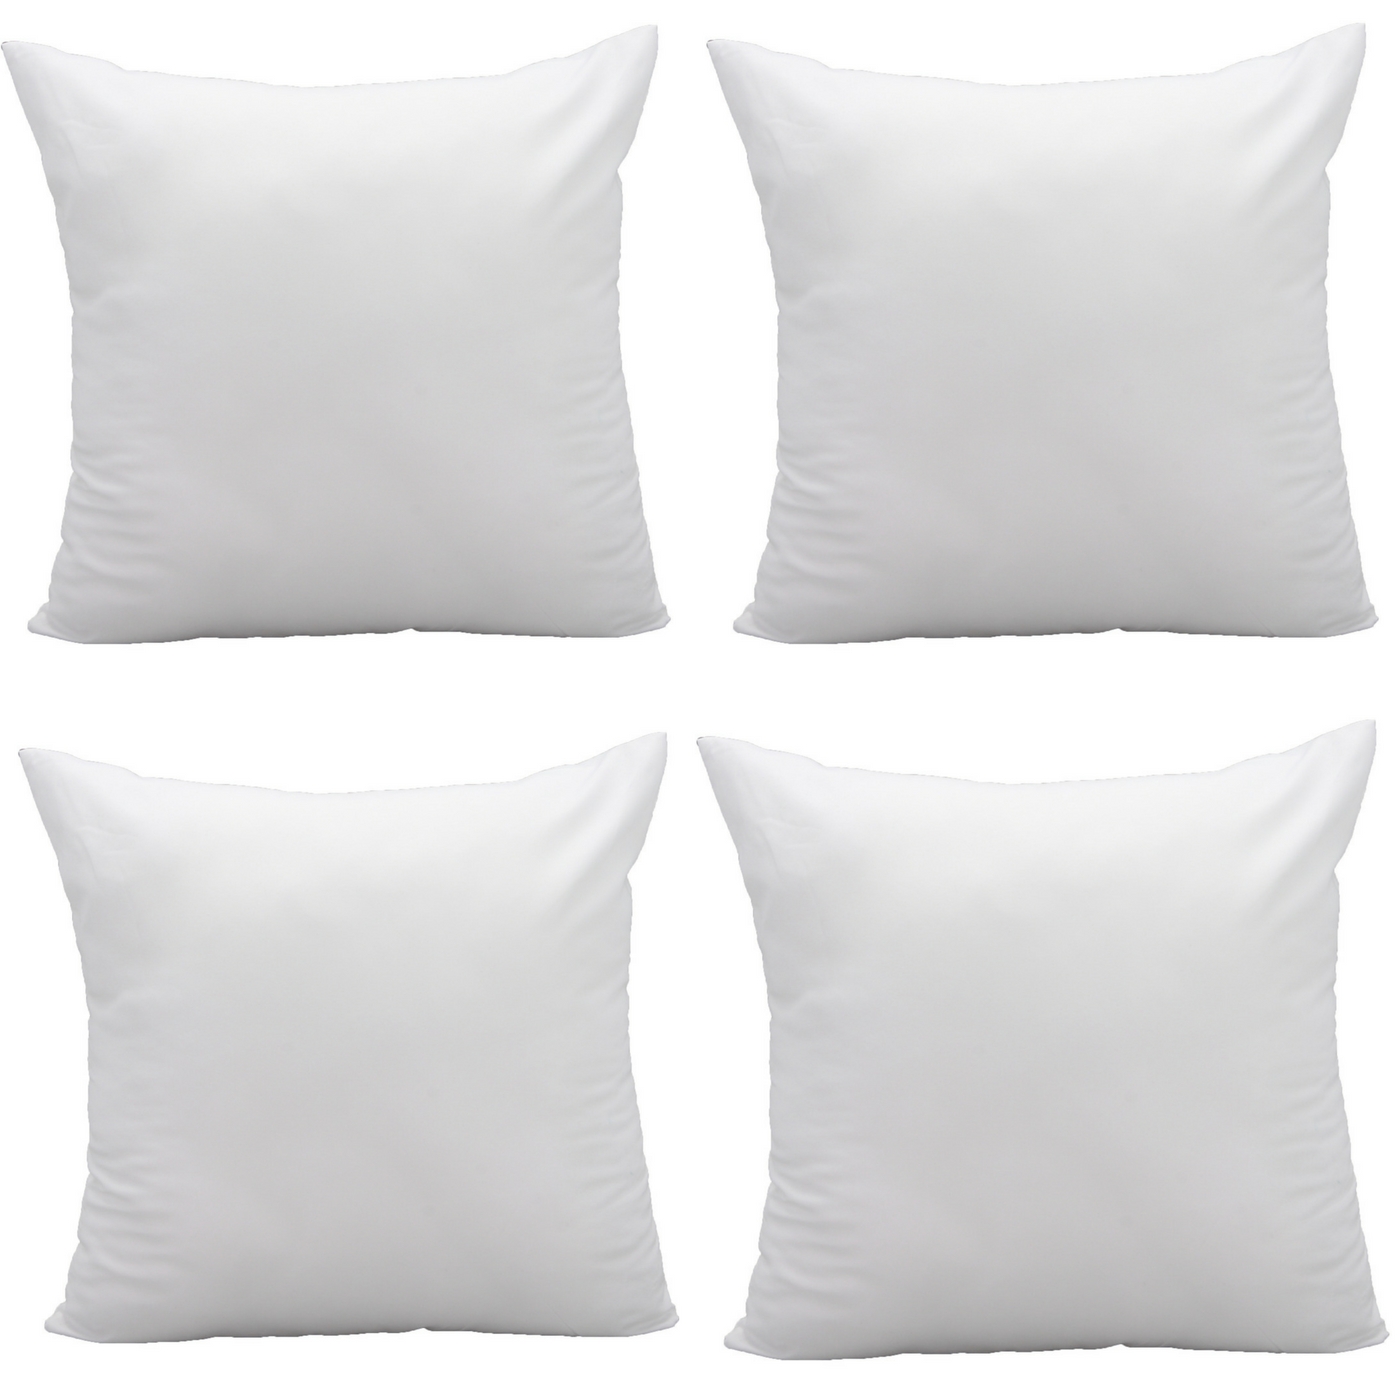 https://www.momjunction.com/wp-content/uploads/product-images/pal-fabric-square-pillow-inserts_afl411.jpg